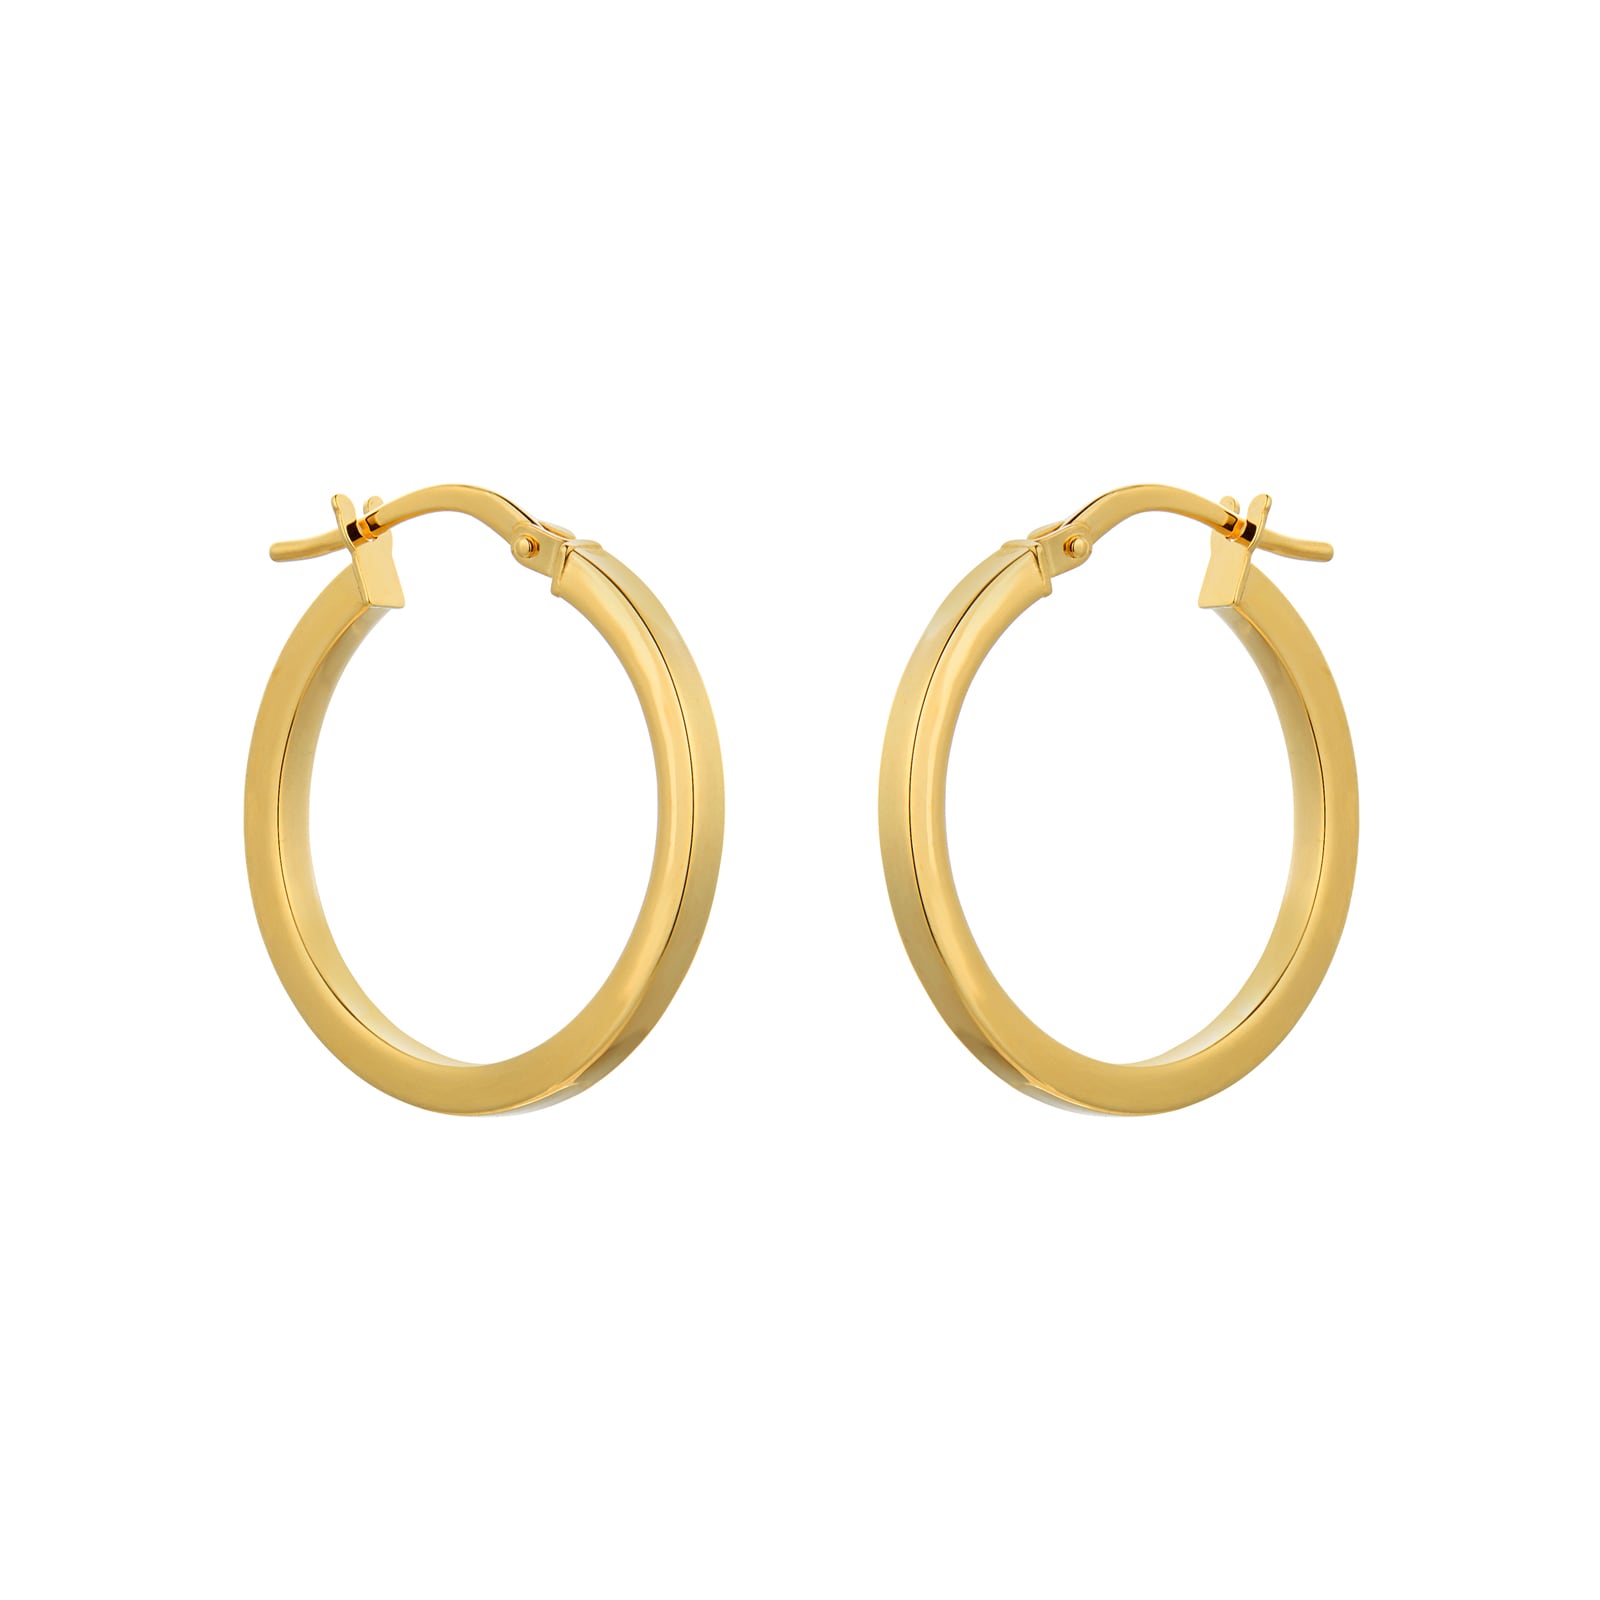 Goldsmiths 18ct Yellow Gold 21mm Square Tube Round Hoop Earrings 7.52. ...